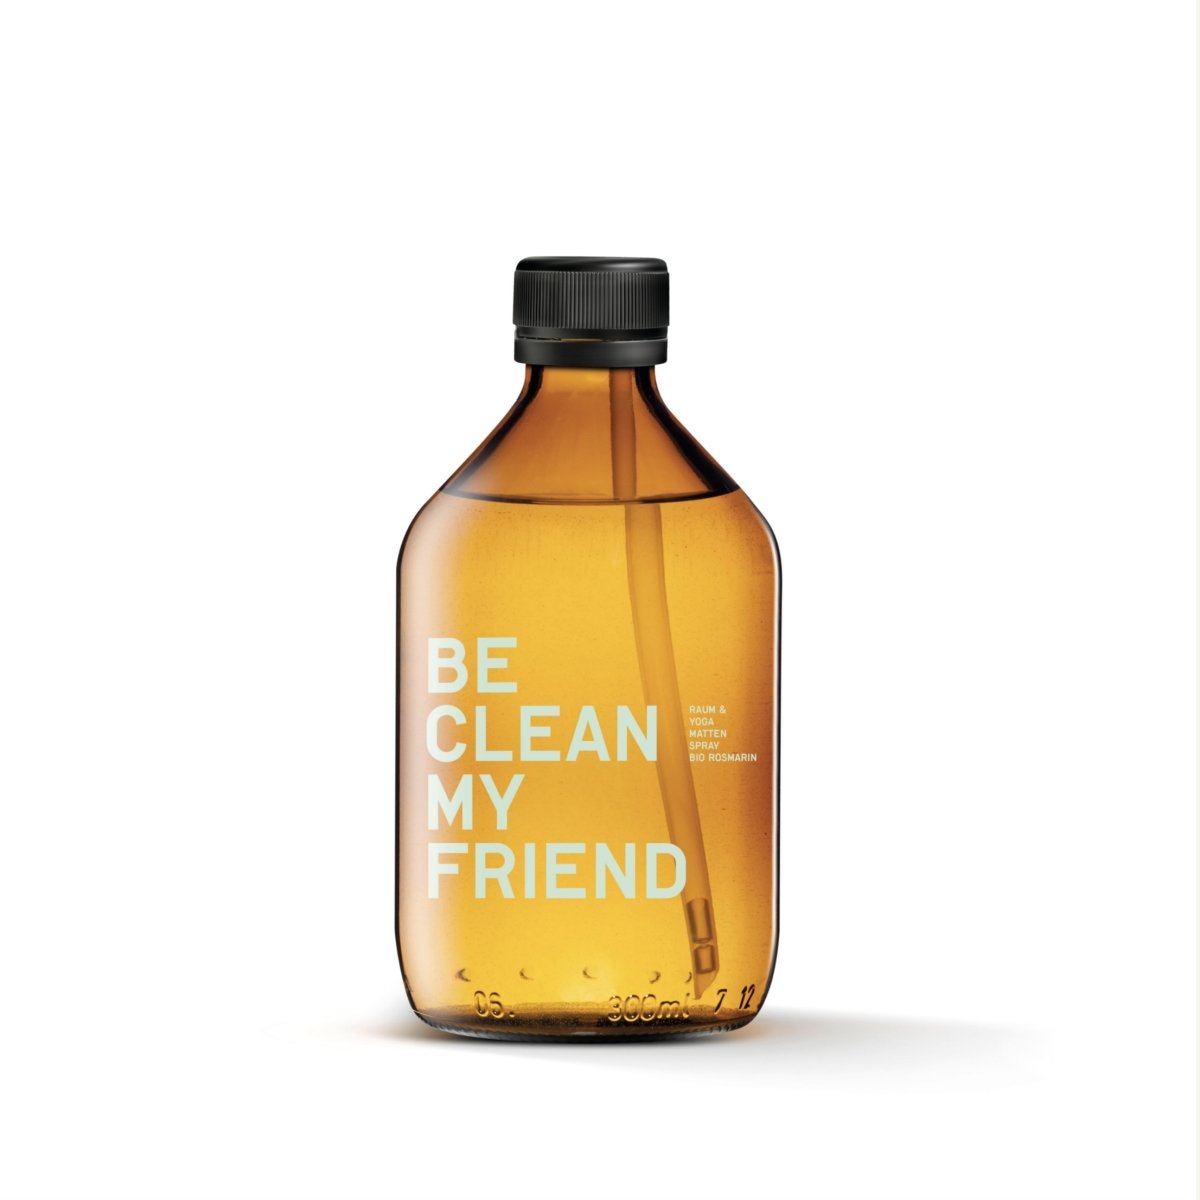 Be (CLEAN) My Friend - Room and Yoga Mat Spray REFILL 300ml - Homebody Denver